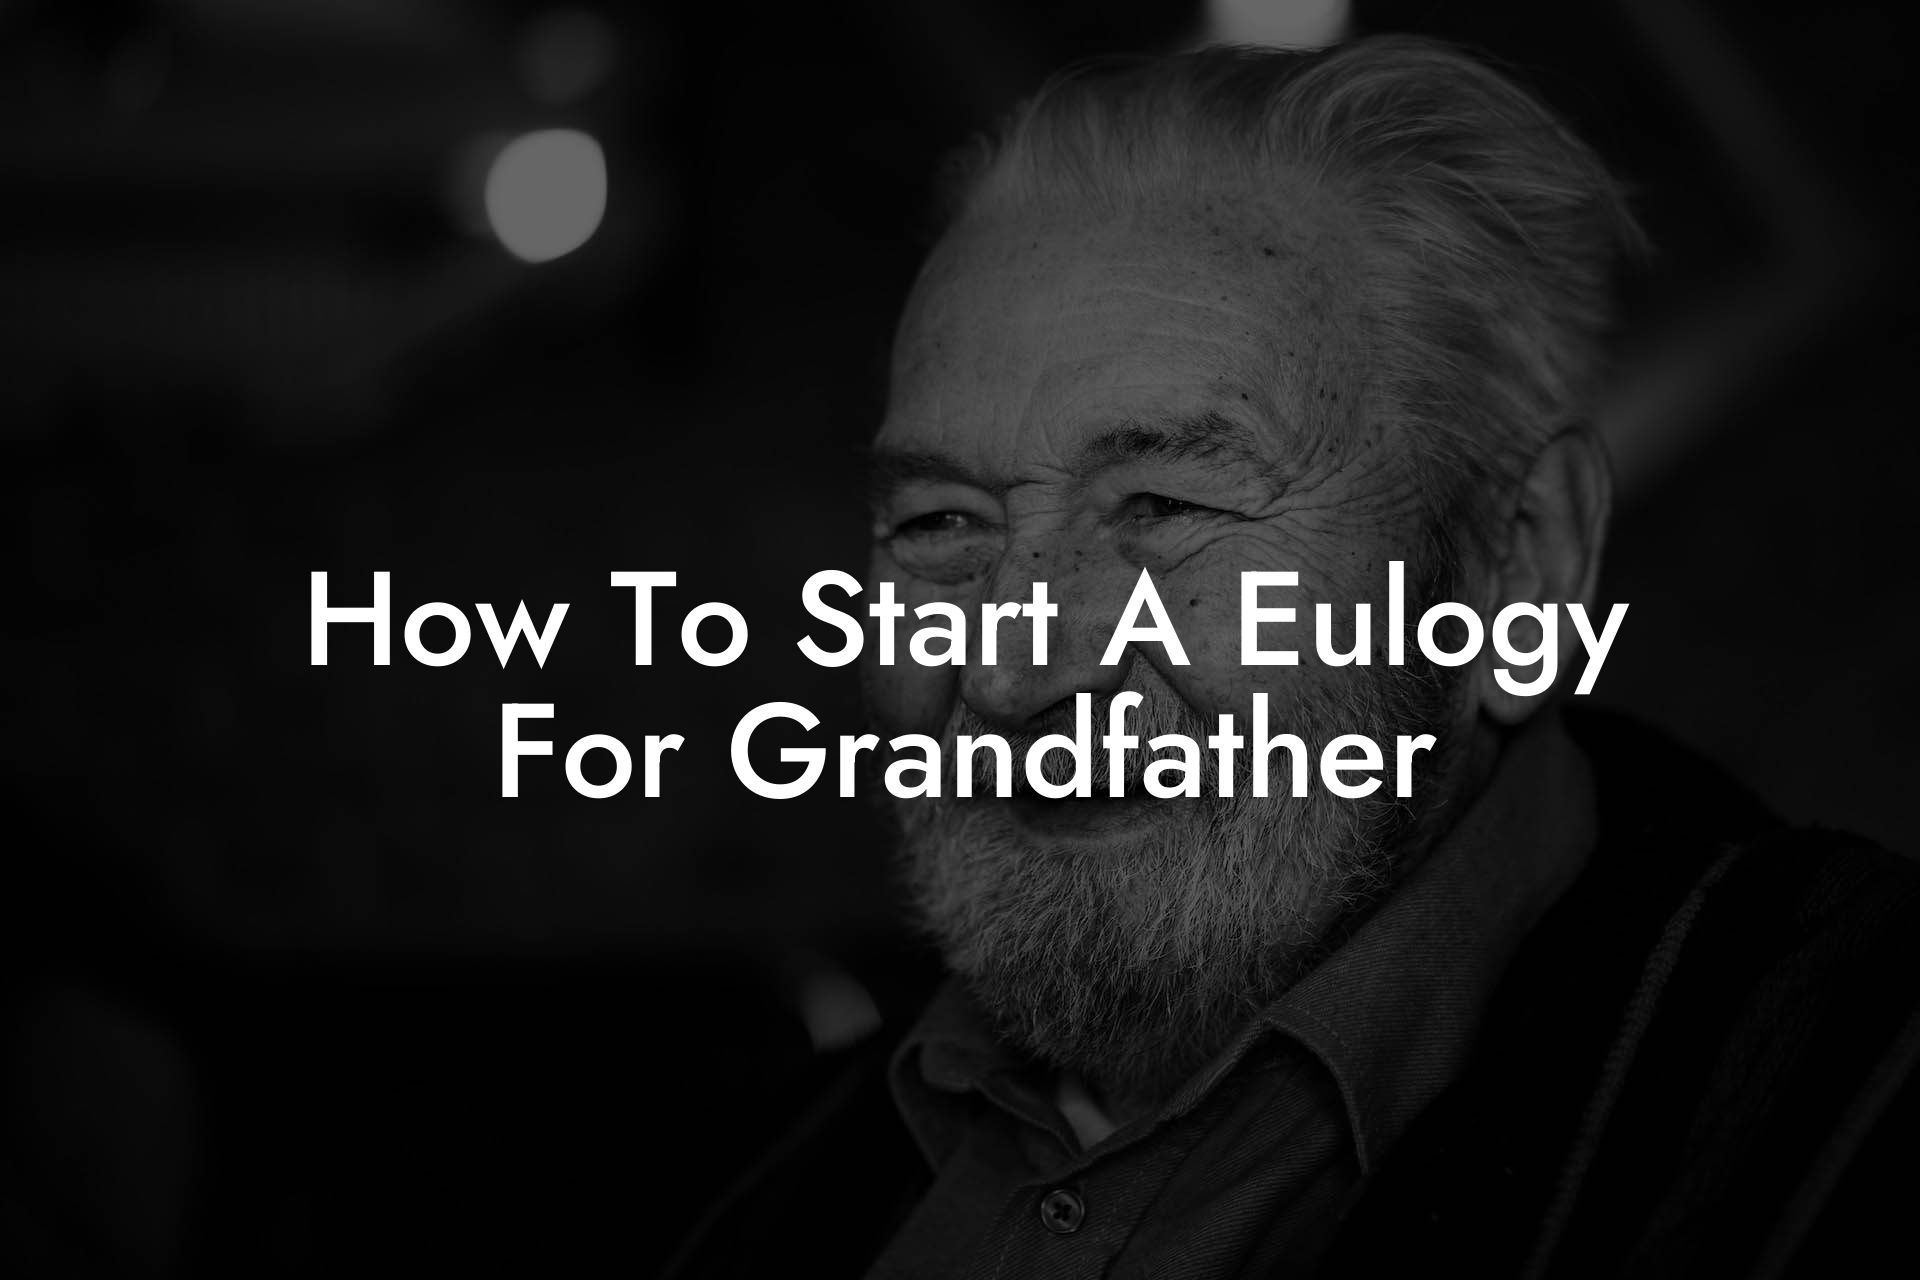 How To Start A Eulogy For Grandfather